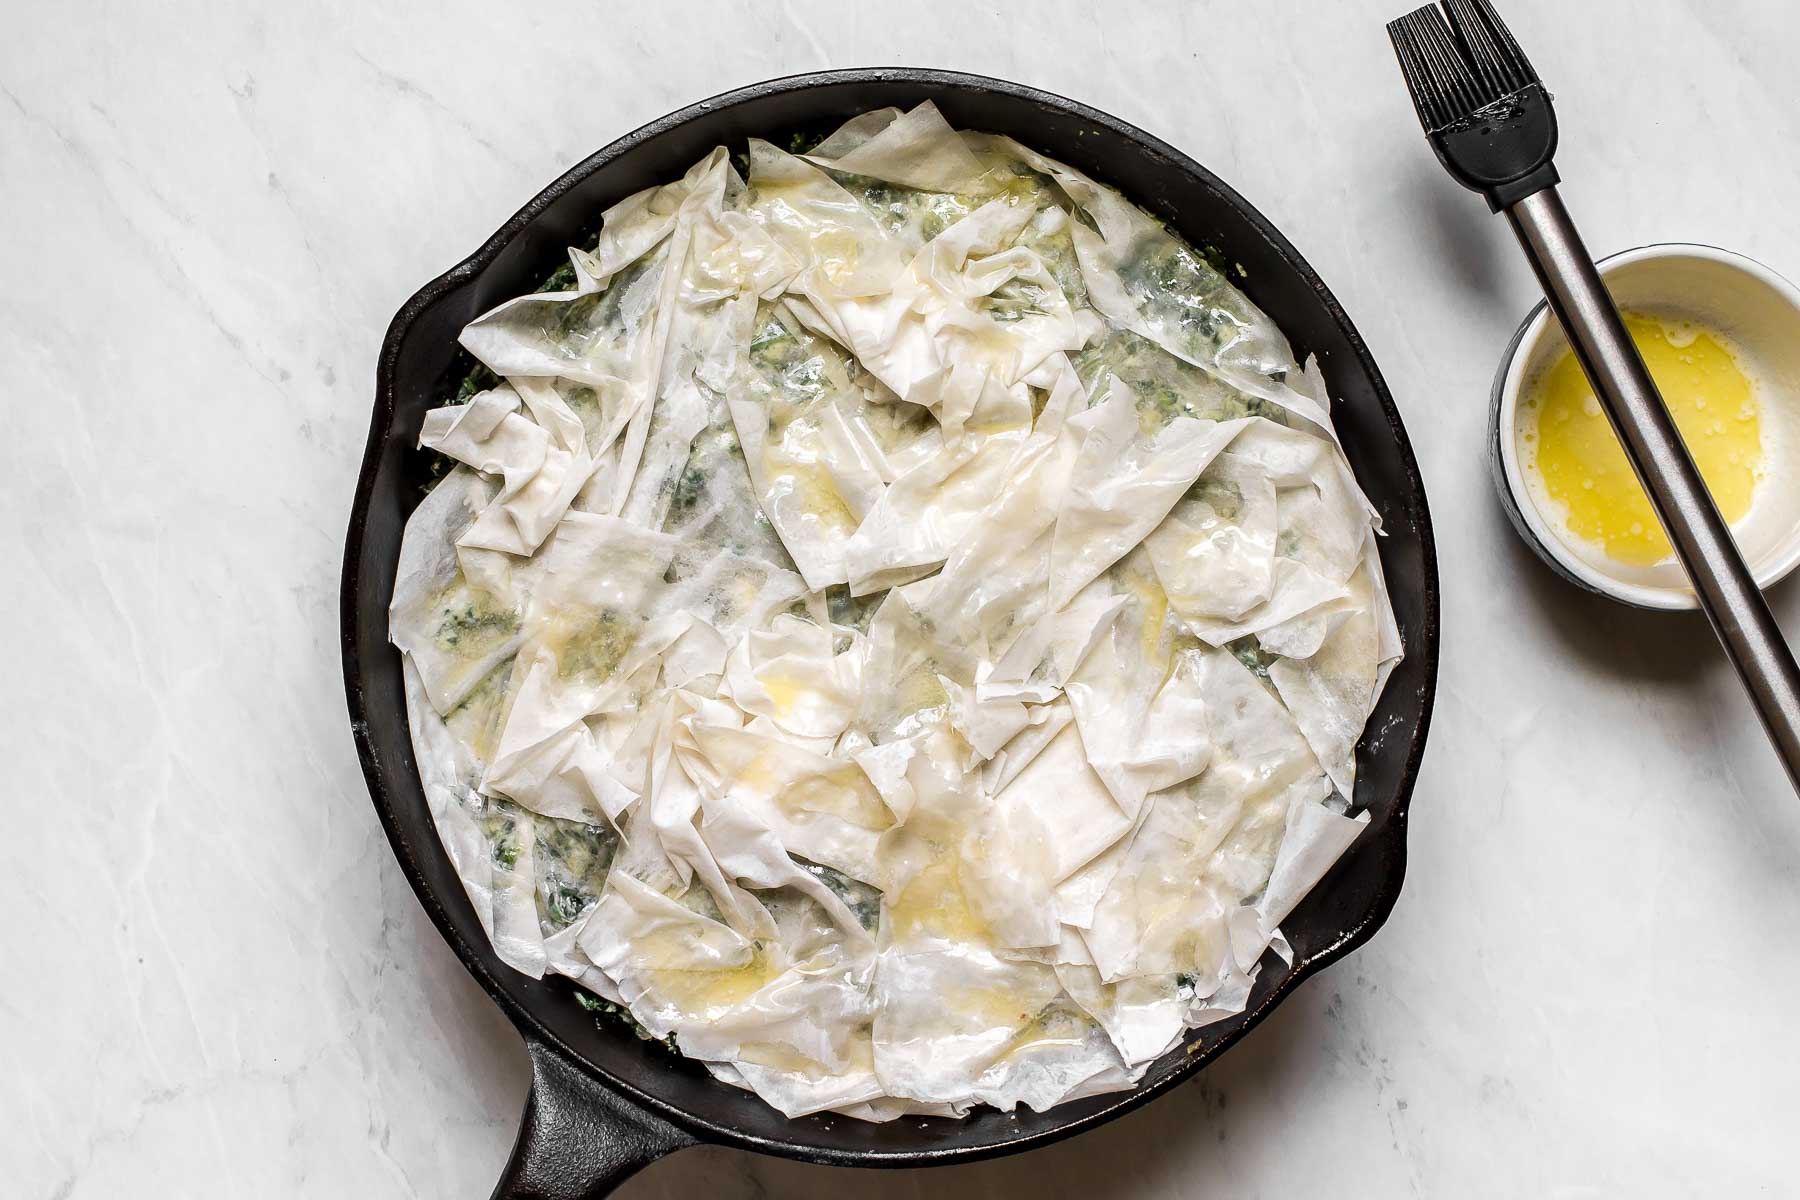 Phyllo dough on a cast iron skillet.